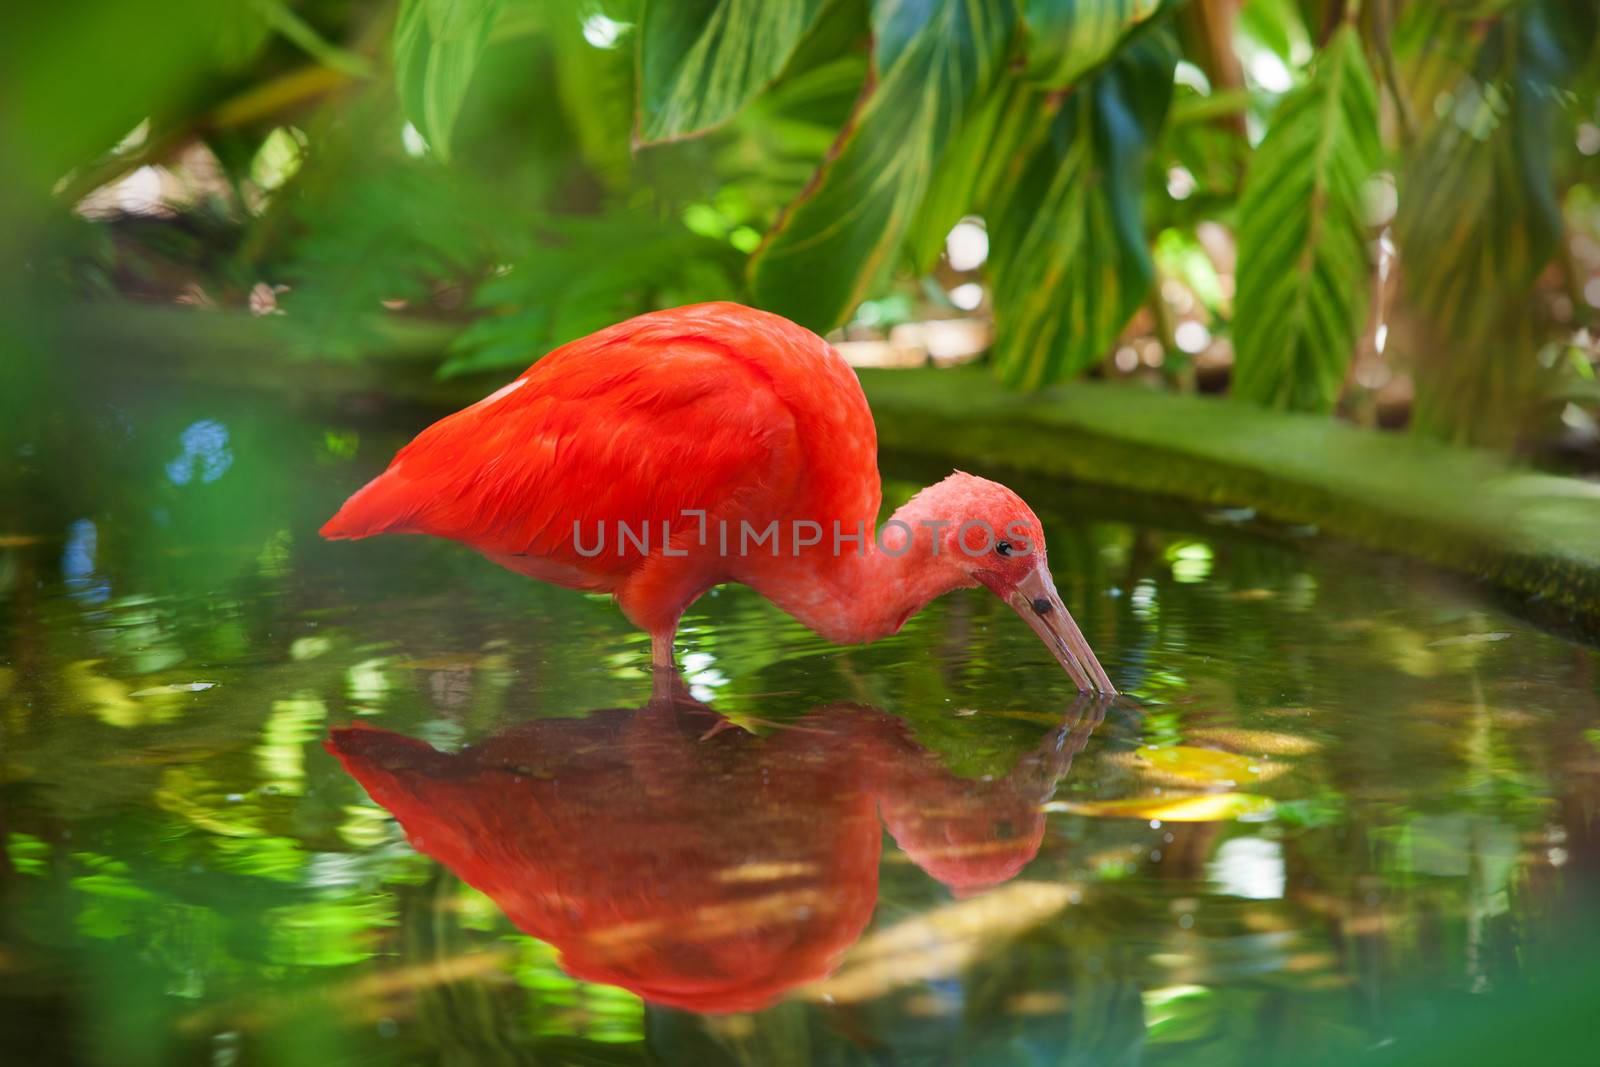 Hungry Carribean Scarlet Ibis searching for food in water